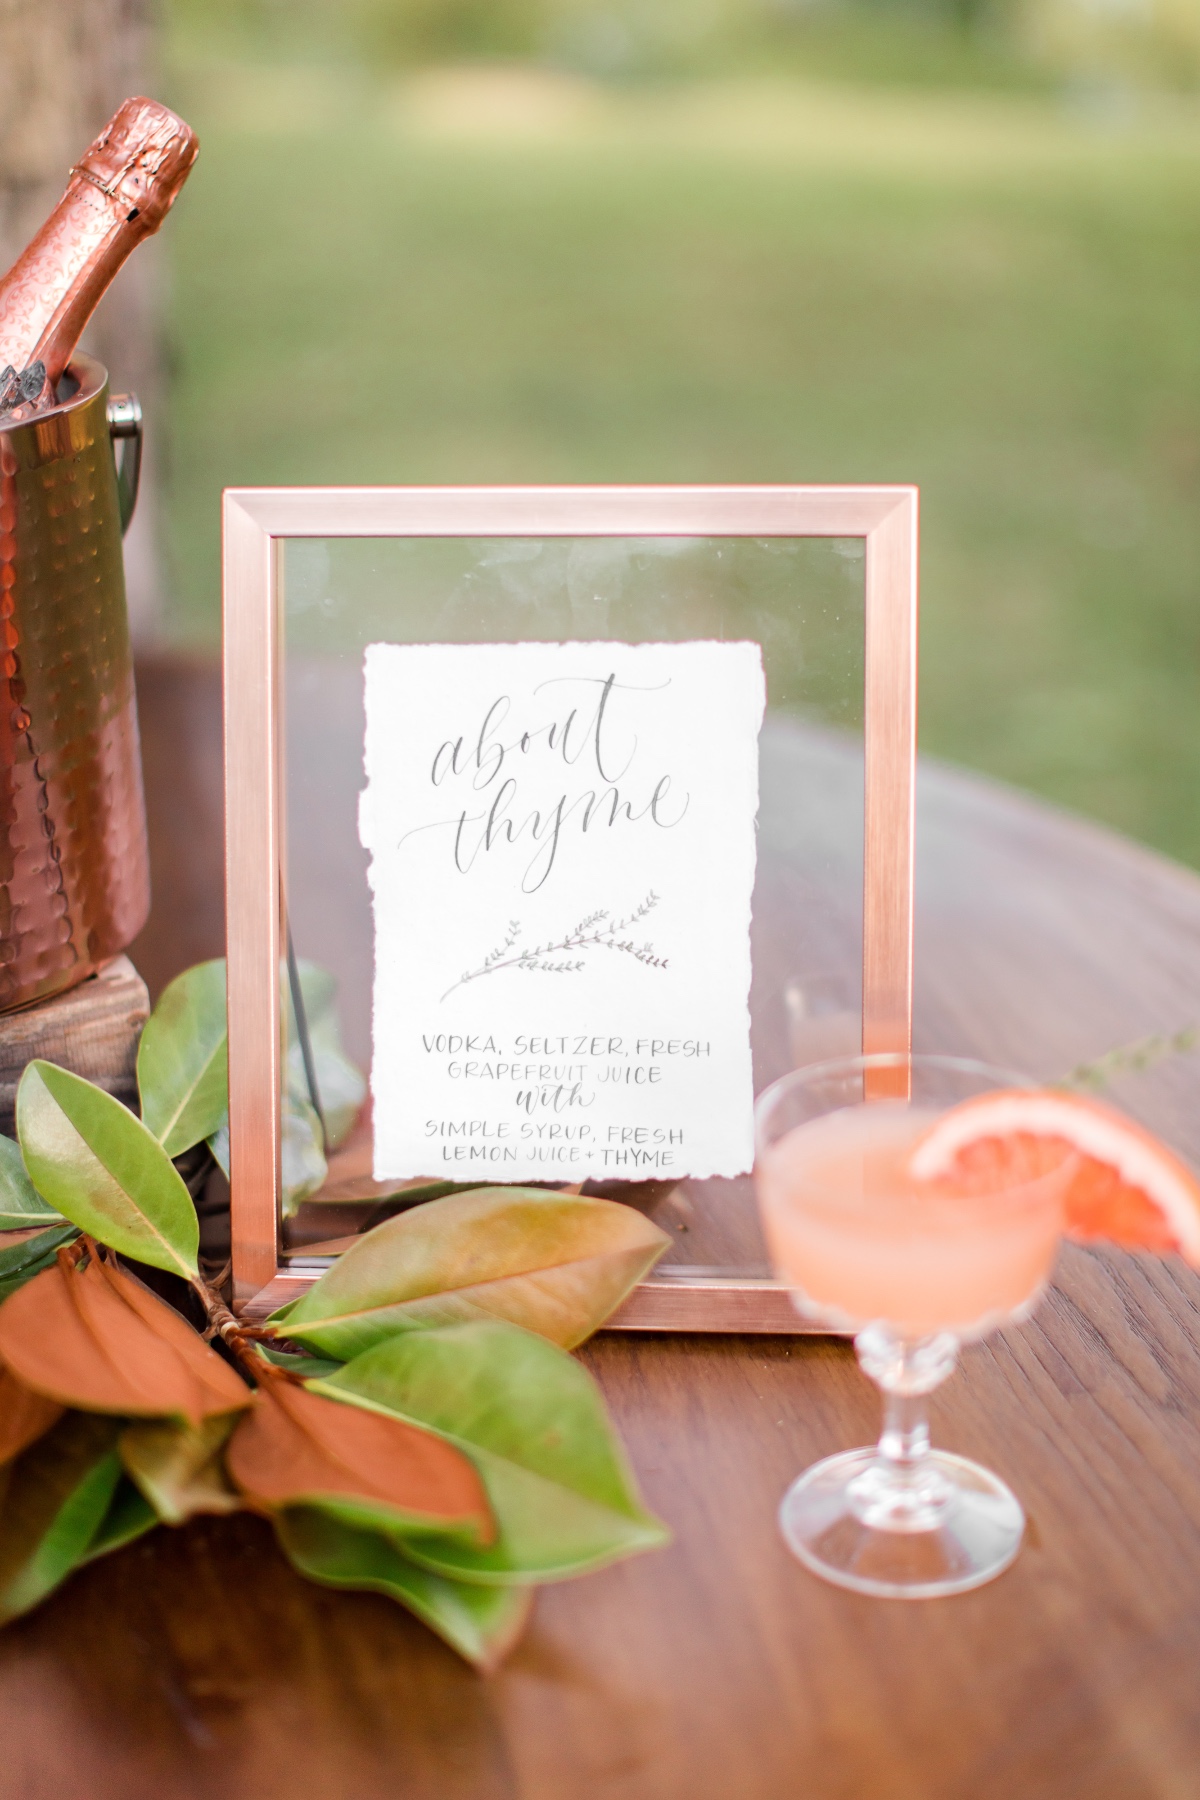 grapefruit and thyme wedding cocktail